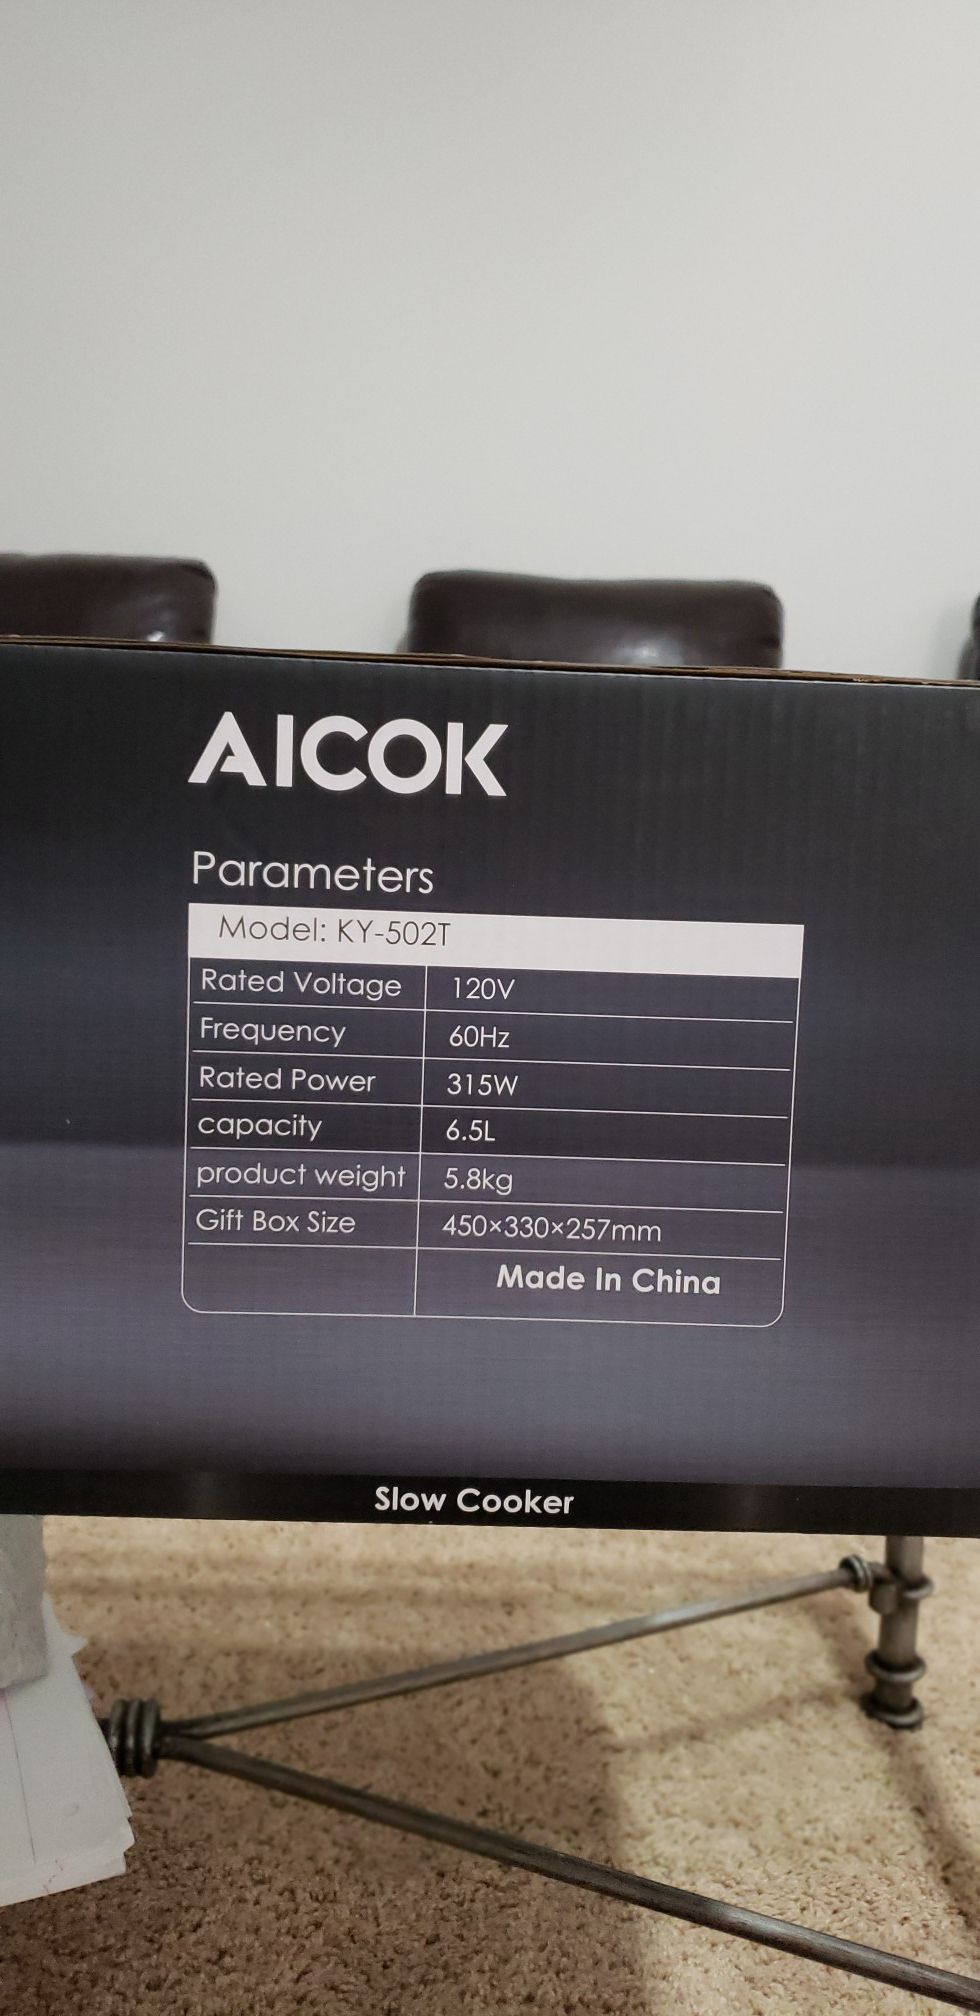 Slow cooker aicok brand